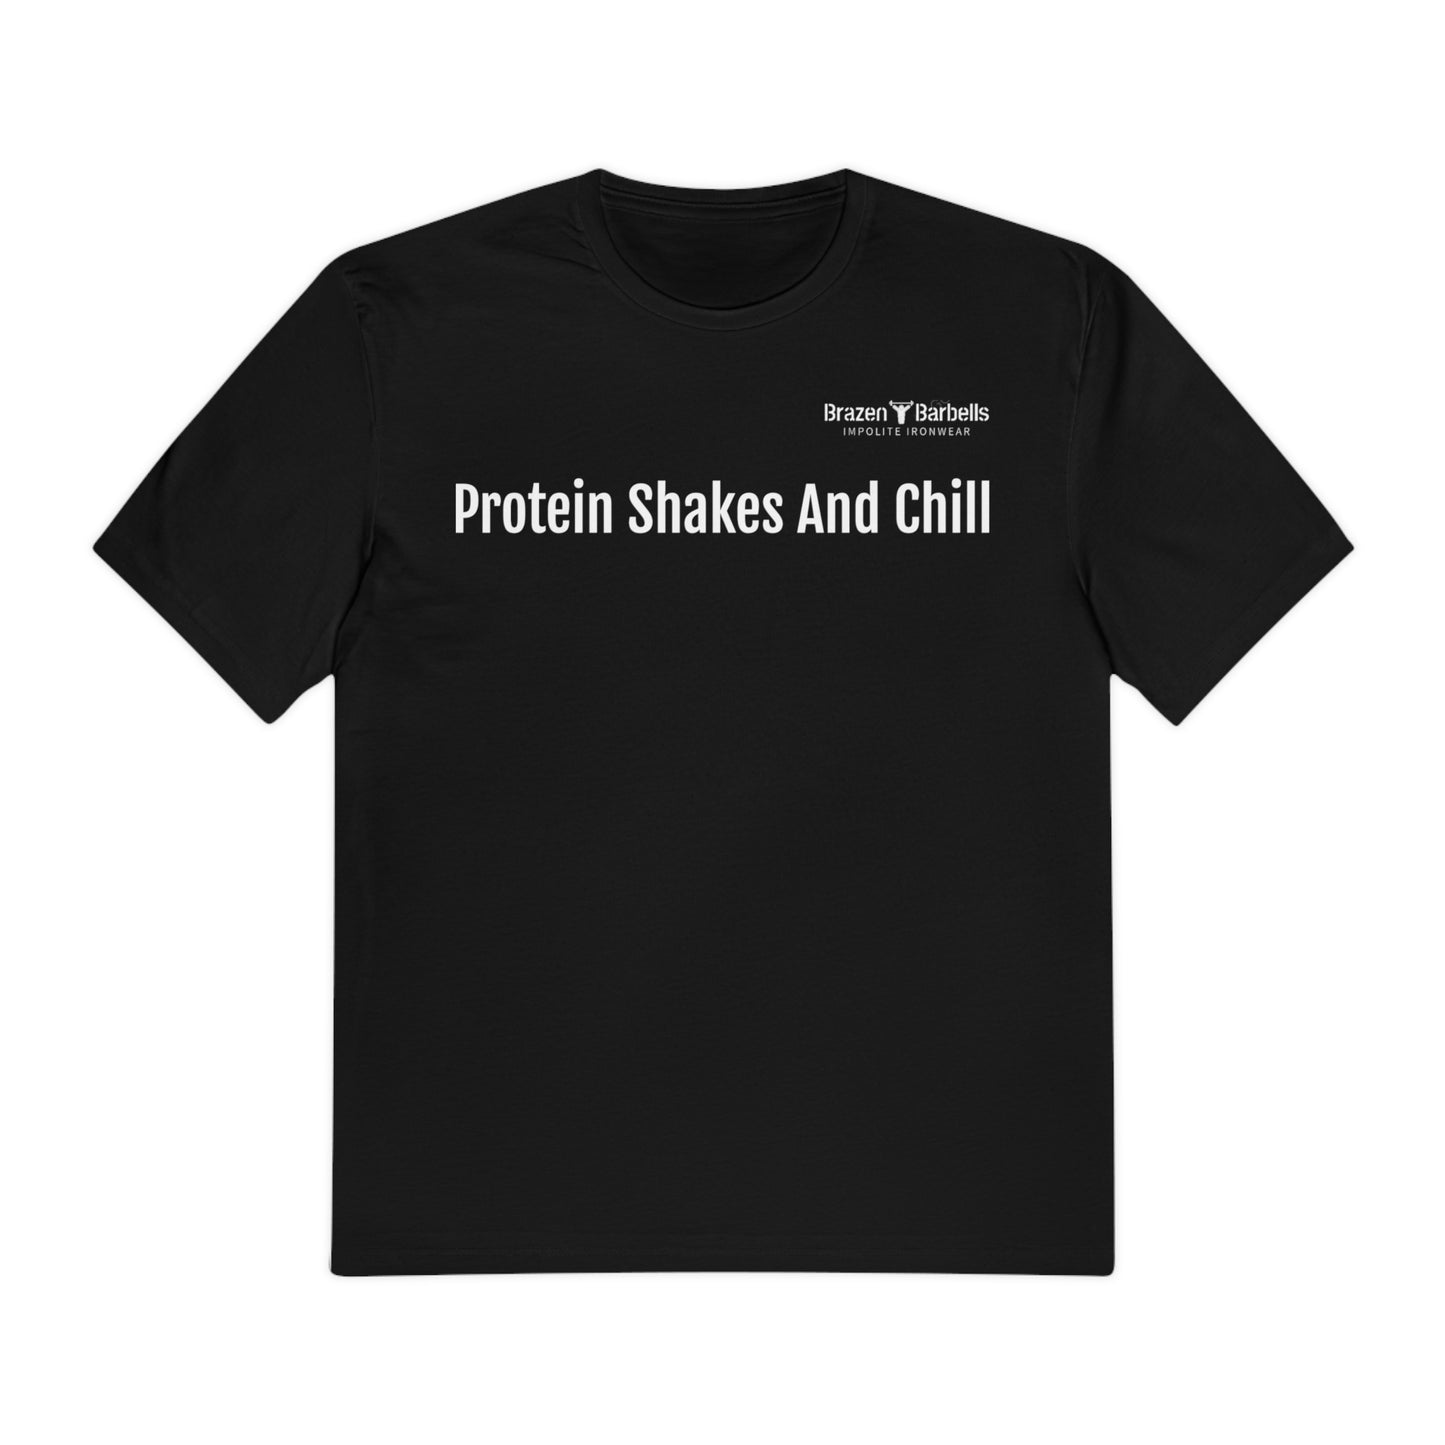 Protein Shakes and Chill Tee